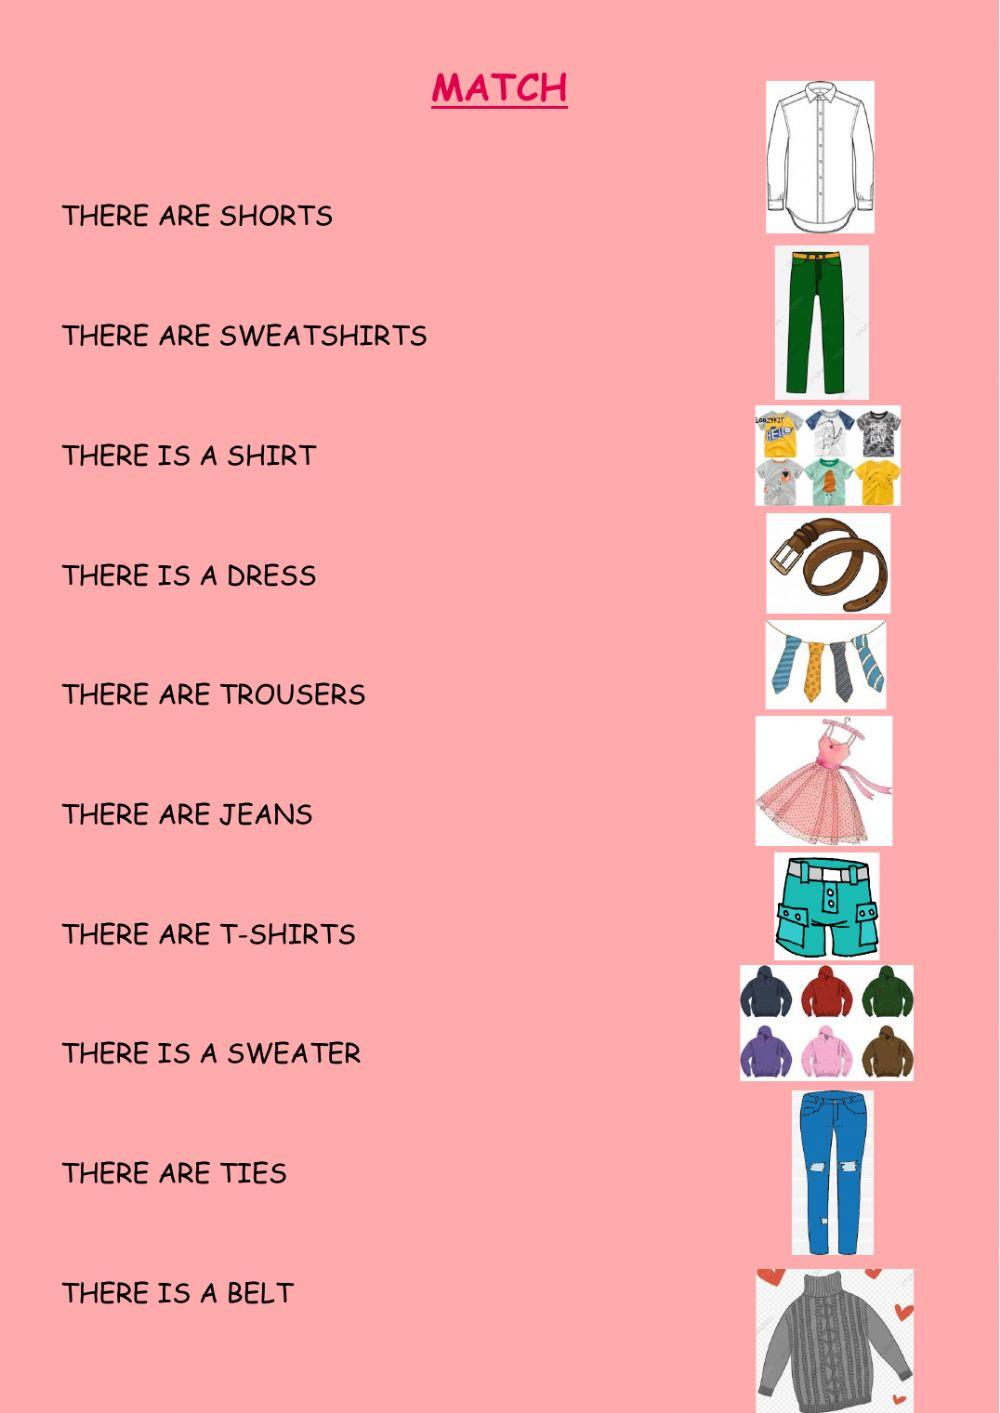 There is-there are-clothes